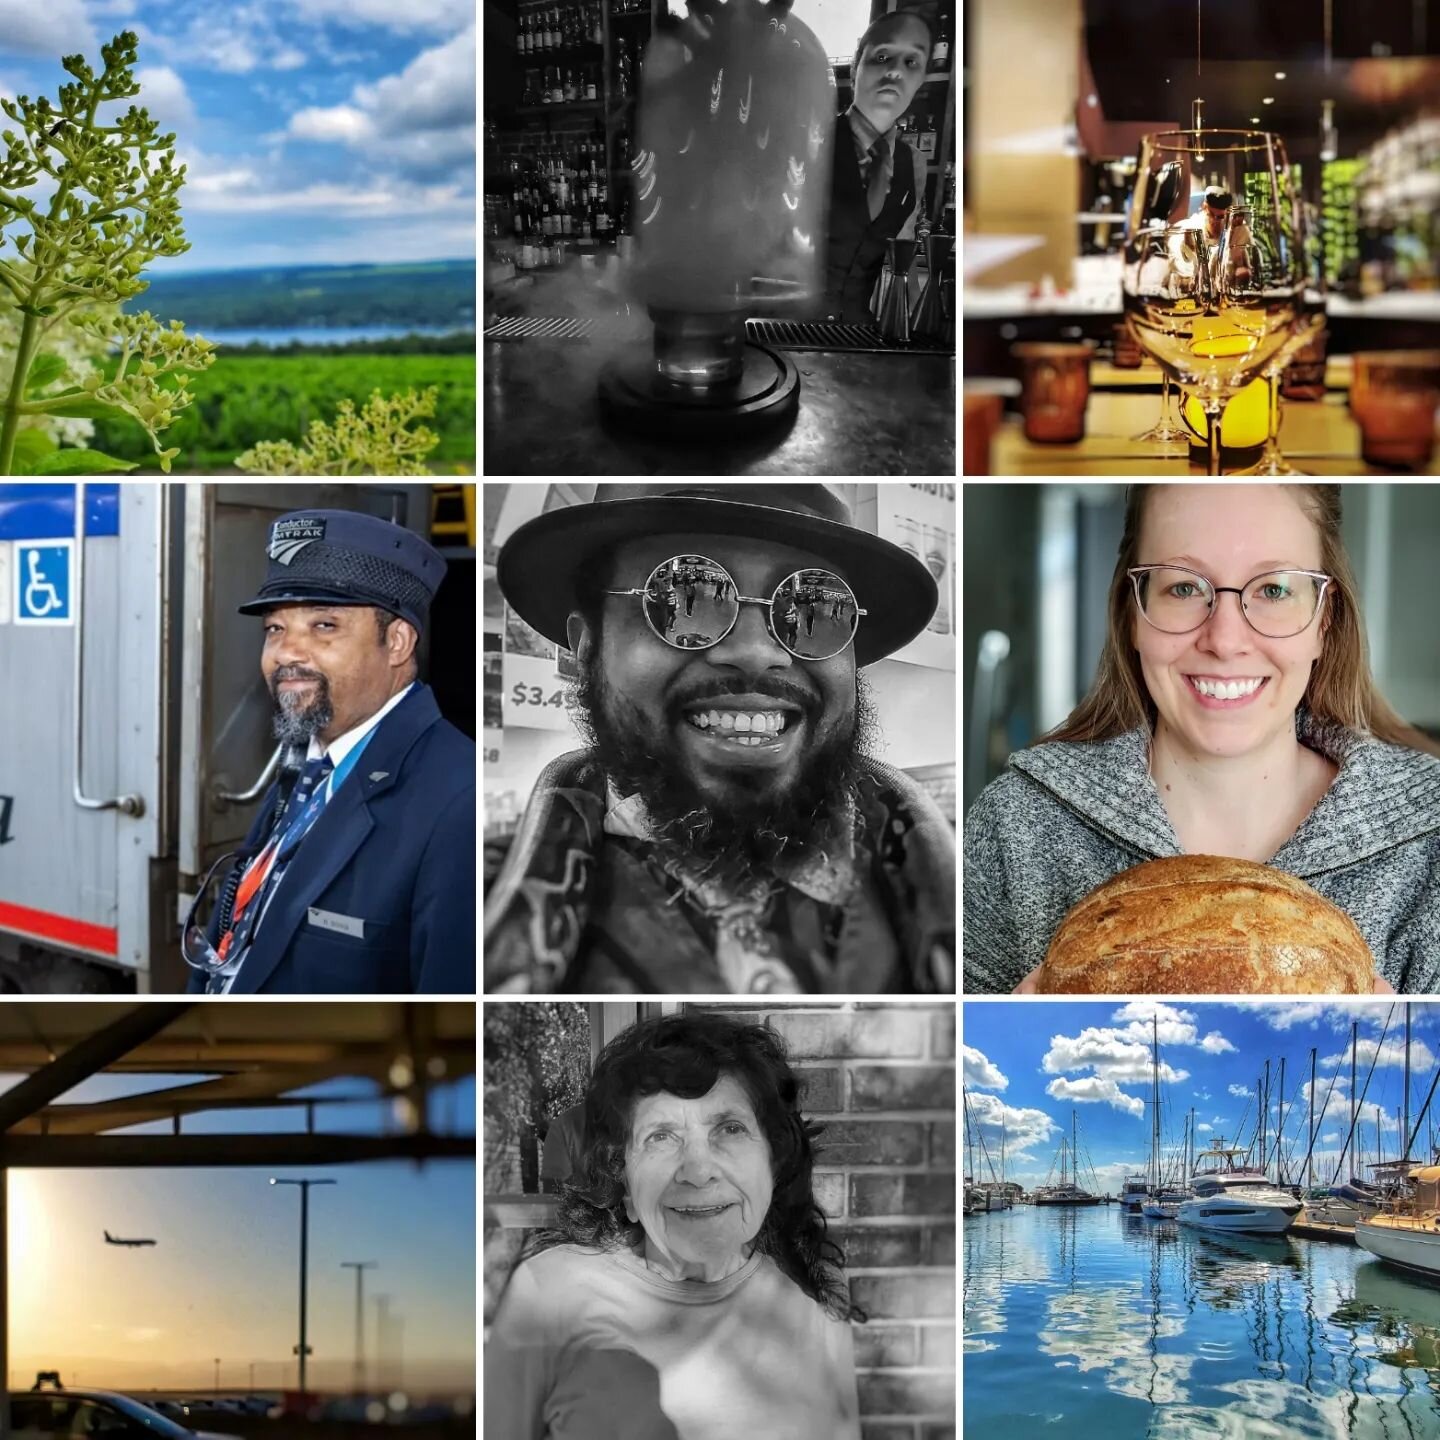 My top nine for 2023

#cgainesmedia #photography #photos #topnine2023 #topnine #top9of2023 #travel #travel_captures #traveling #documentary #photostorytelling #photojournalist #photojournalism #explore #explorer #newyear #happynewyear #2023inreview #